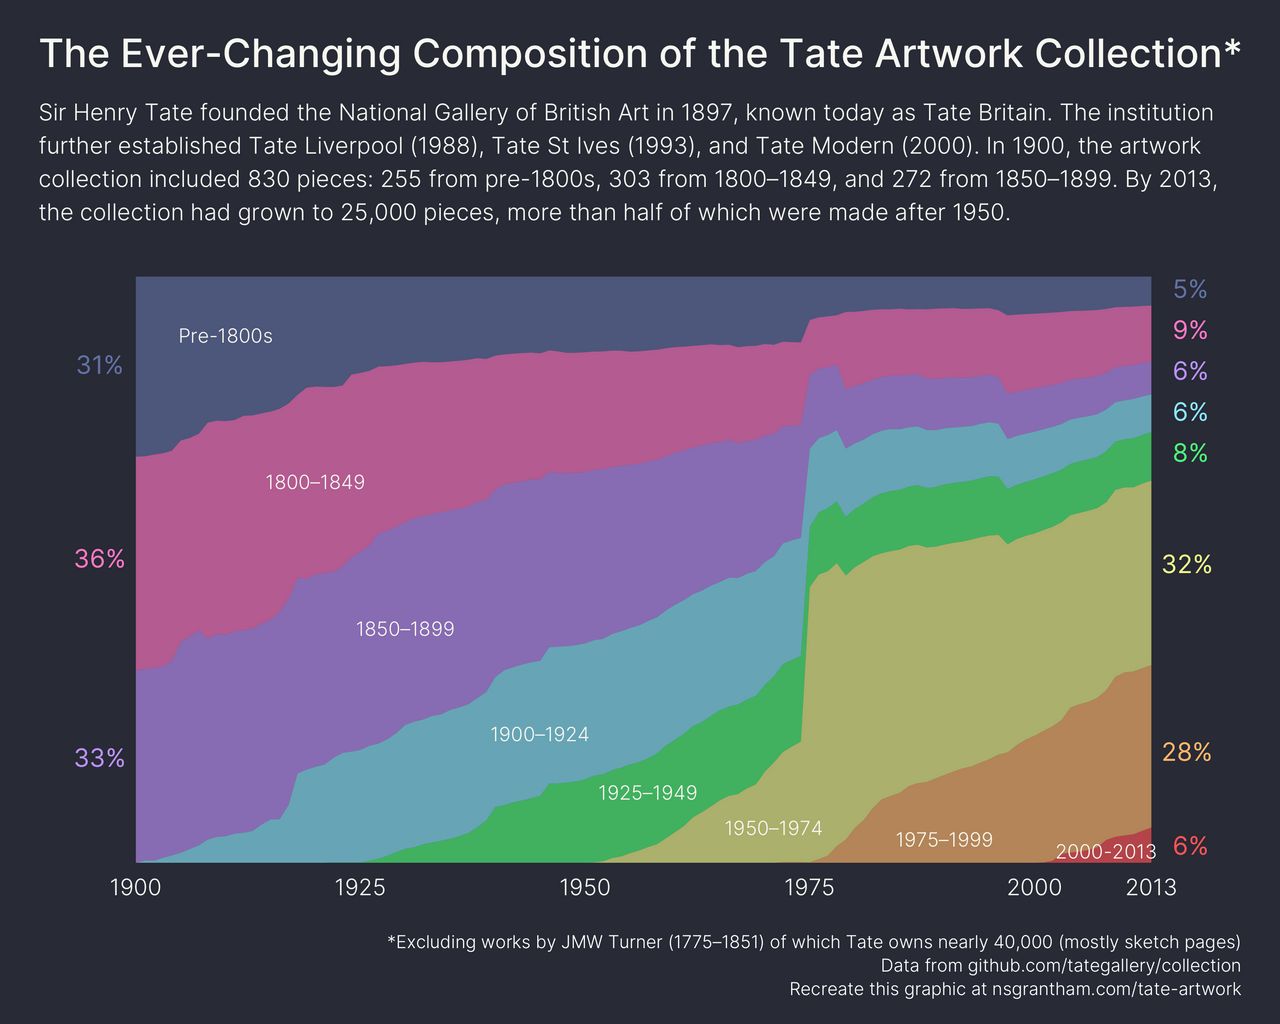 The Tate Artwork Collection